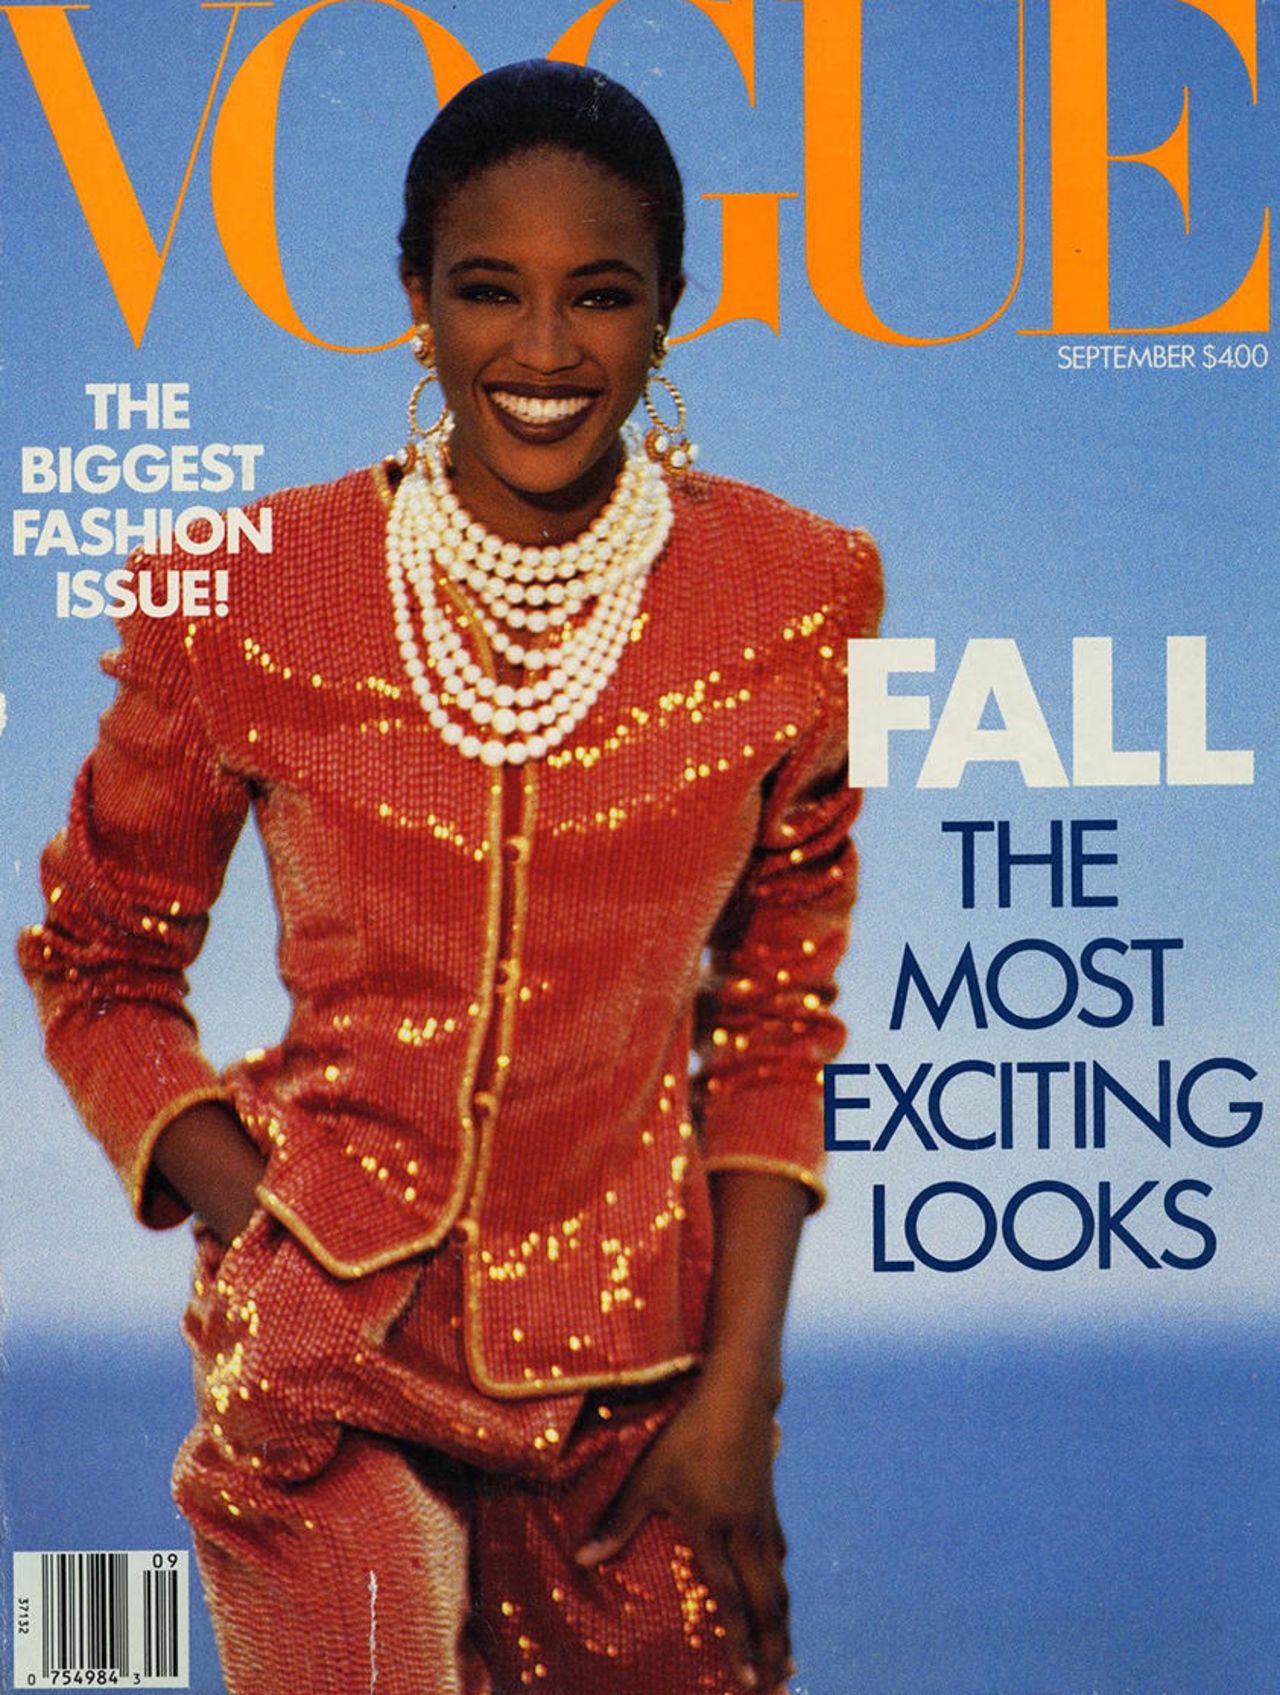 Vogue cover featuring Naomi Campbell (1989)